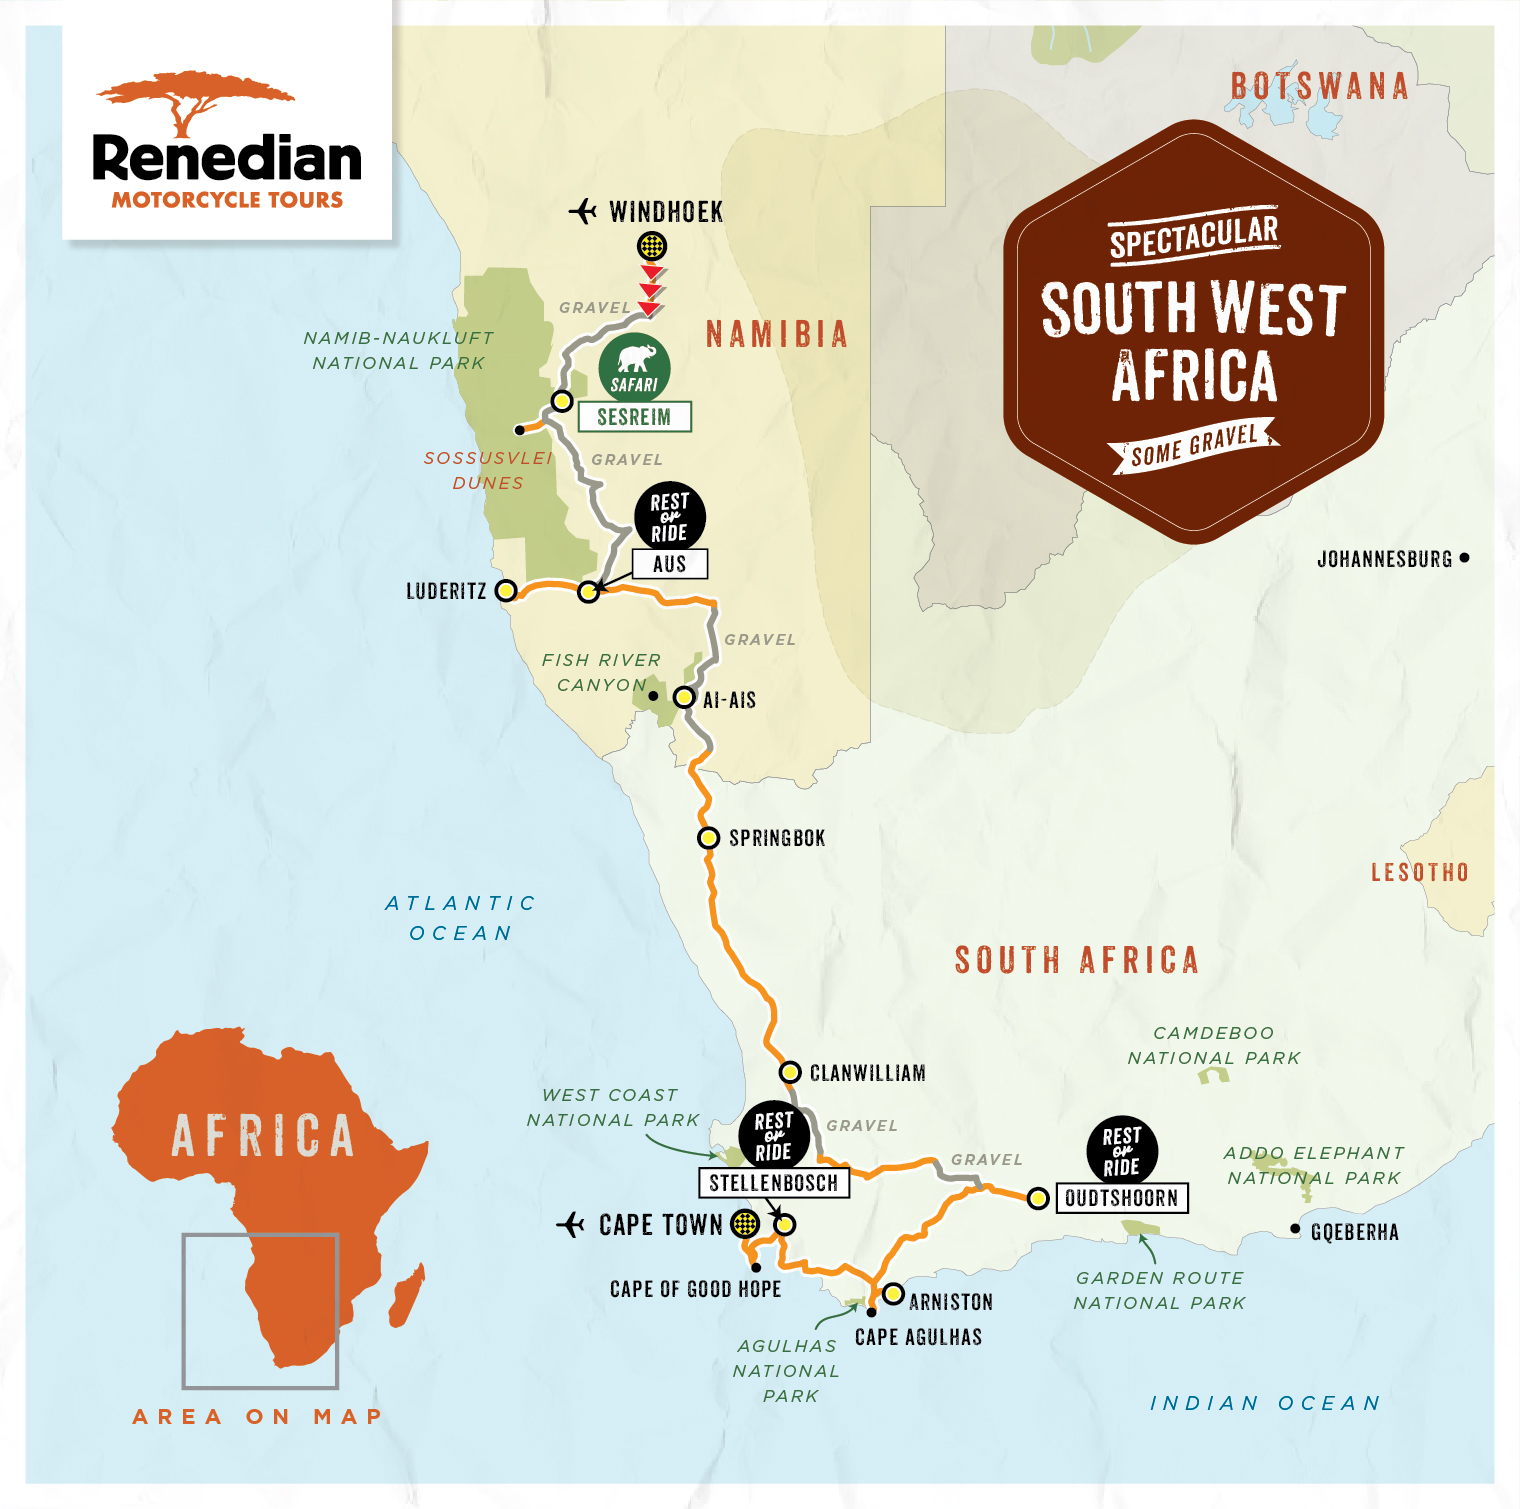 2021 Spectacular South West Africa Tour Map